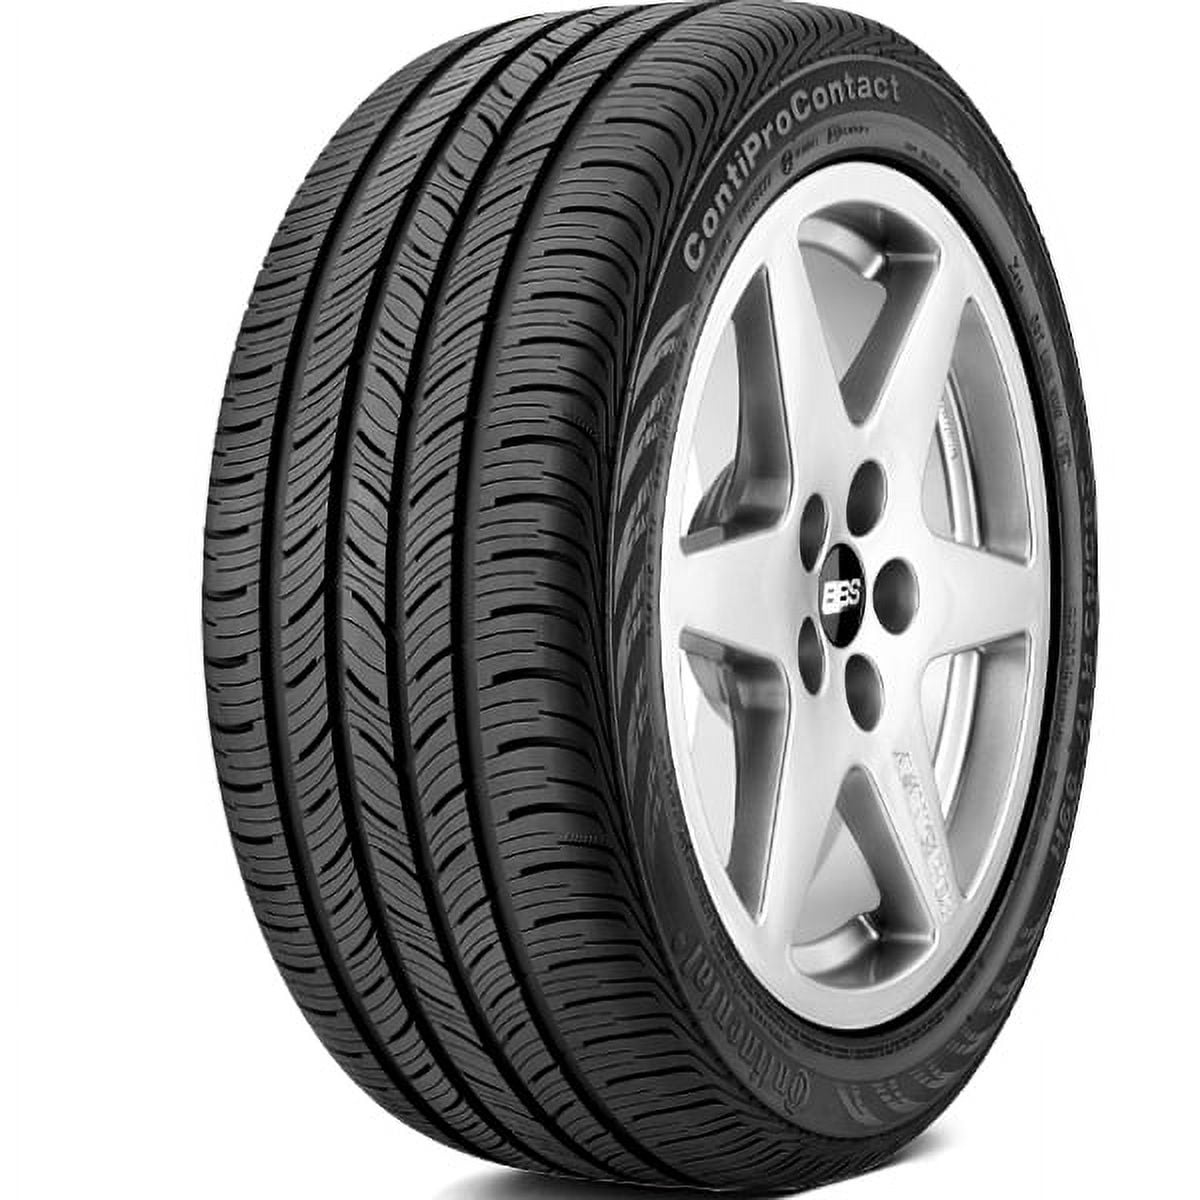 Continental ContiProContact P205/65R16 95H BSW All Season Tire